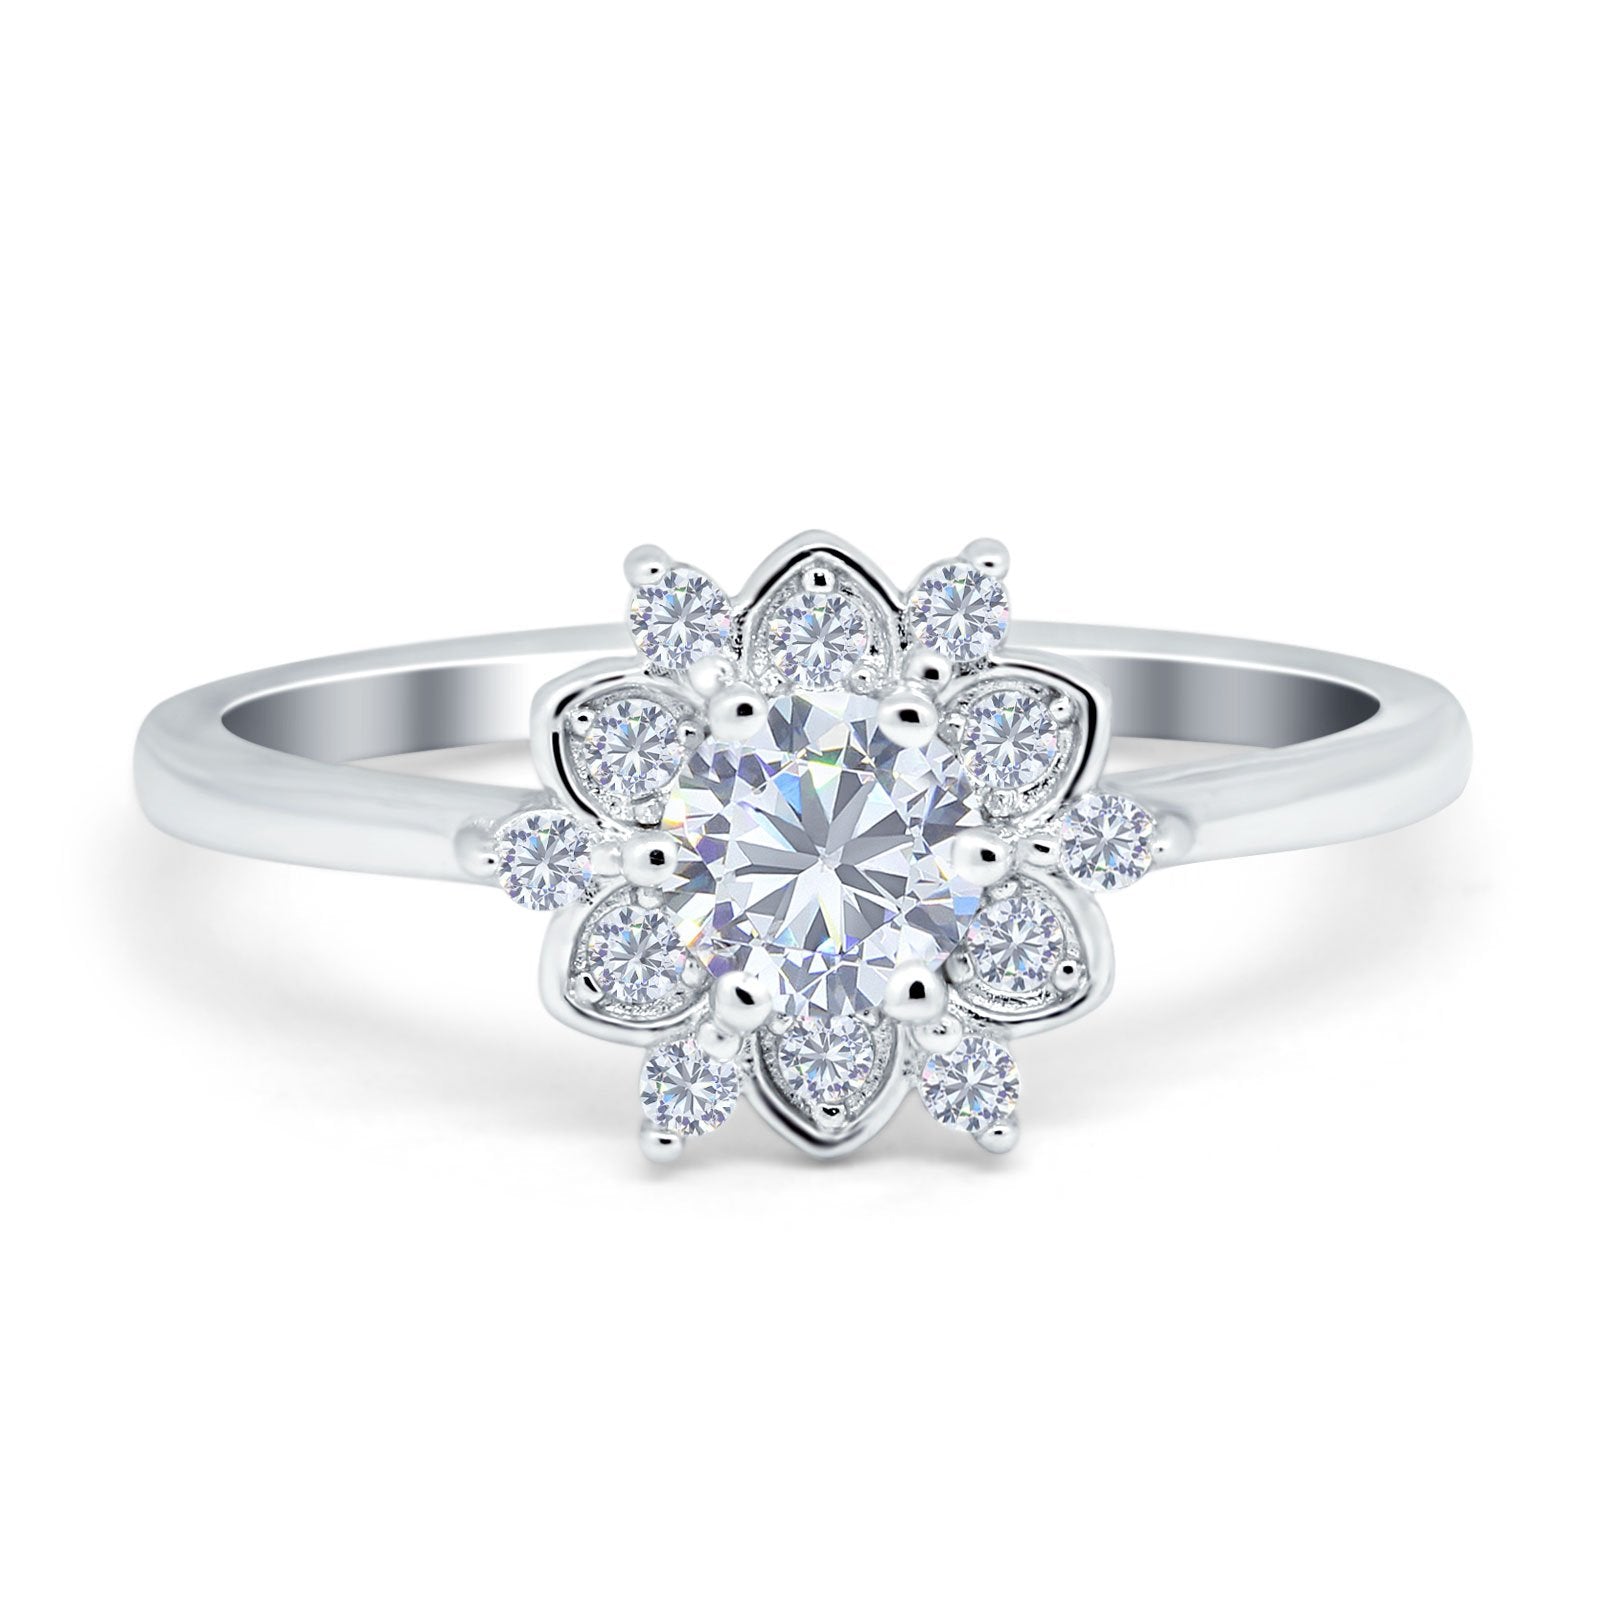 Halo Floral Engagement Ring Round Simulated Cubic Zirconia 925 Sterling Silver